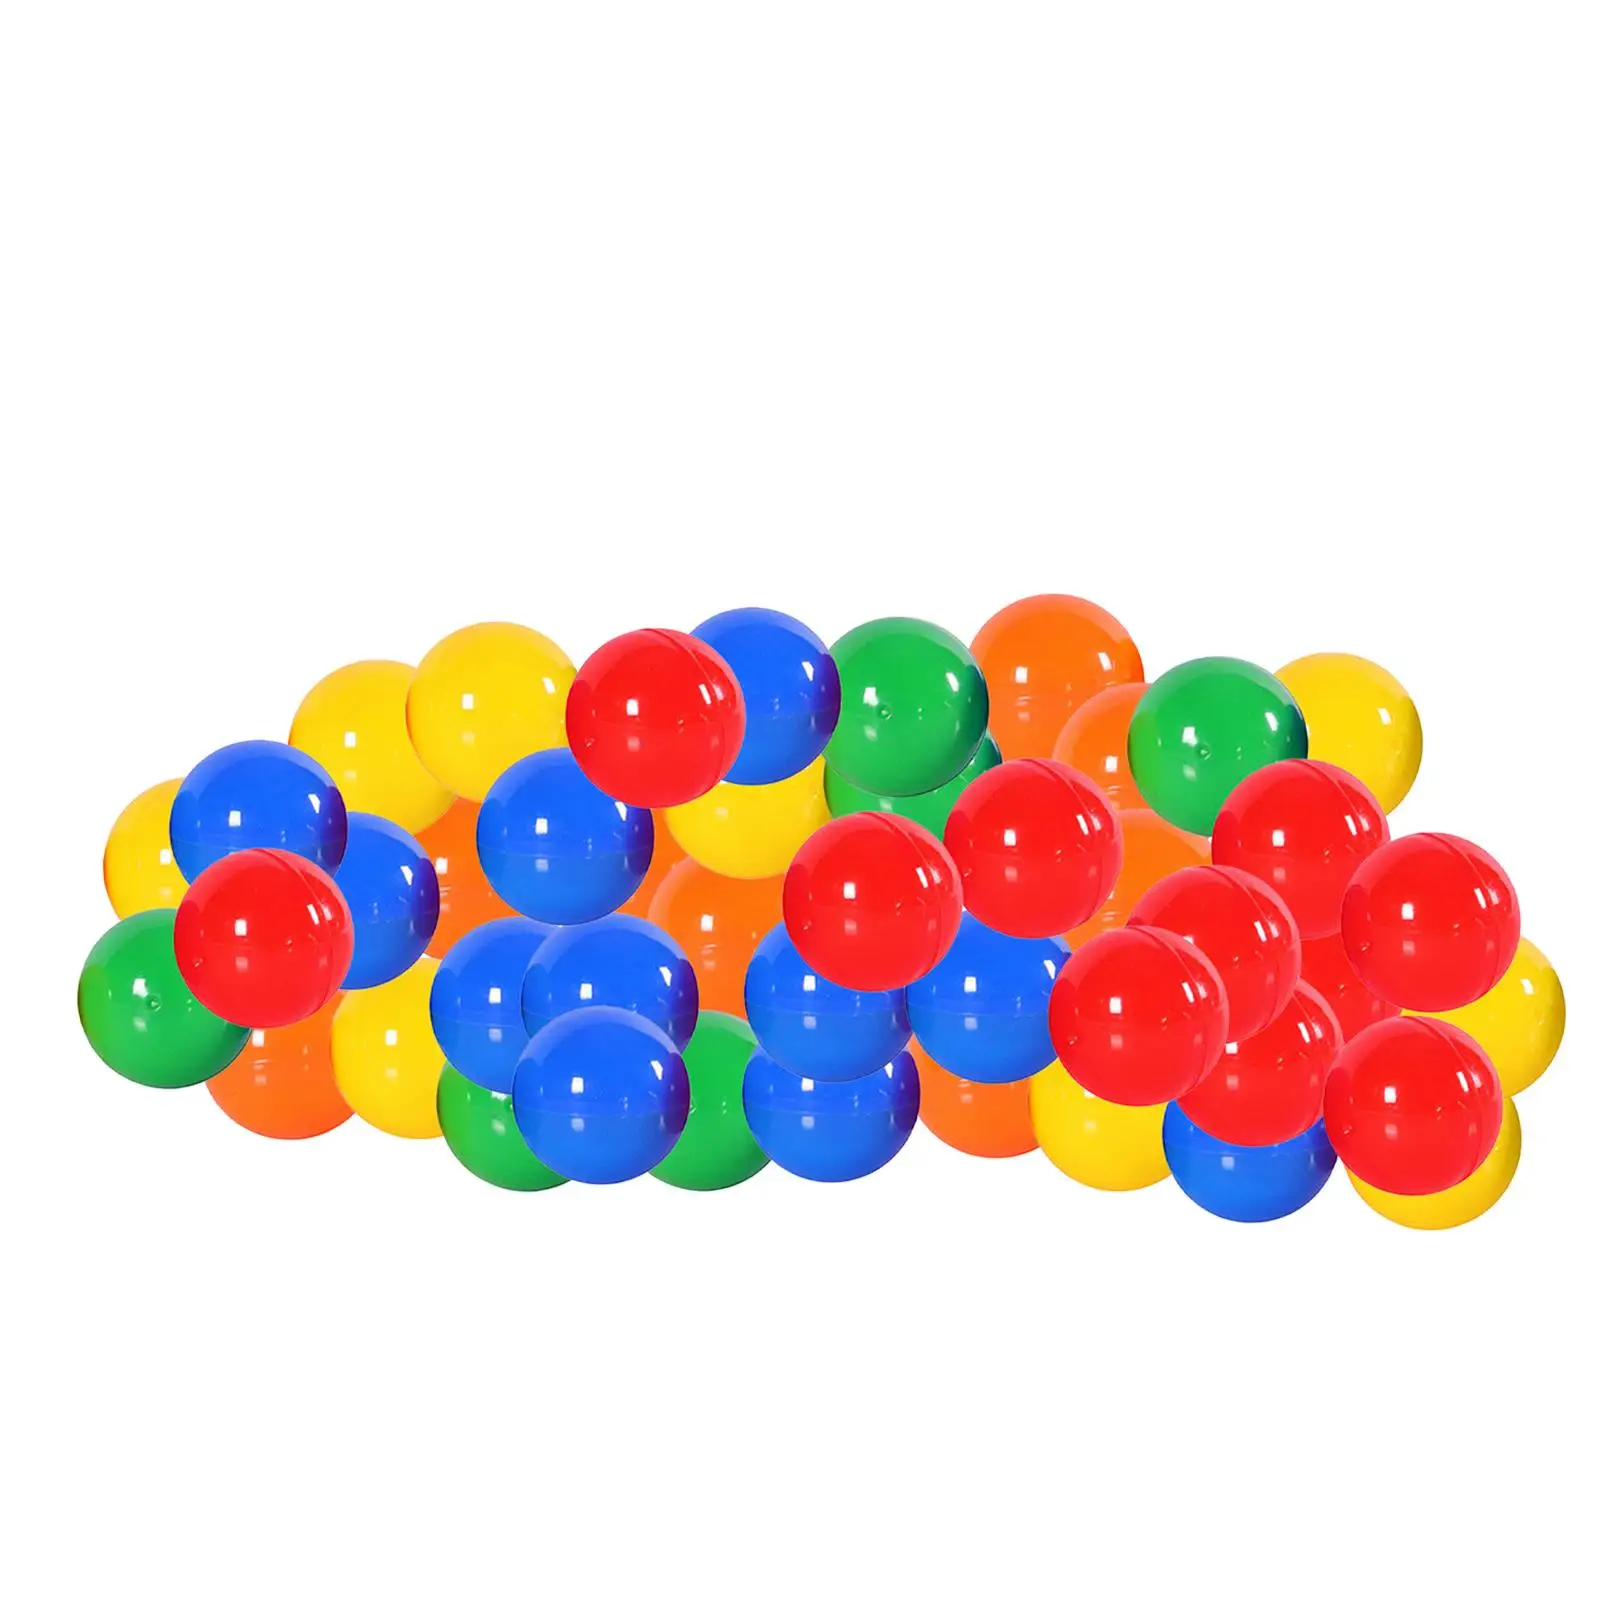 50x Bingo Ball Opening Replacement Parts Fittings Portable Calling Balls Raffle Balls for Office home Game Parties Nights